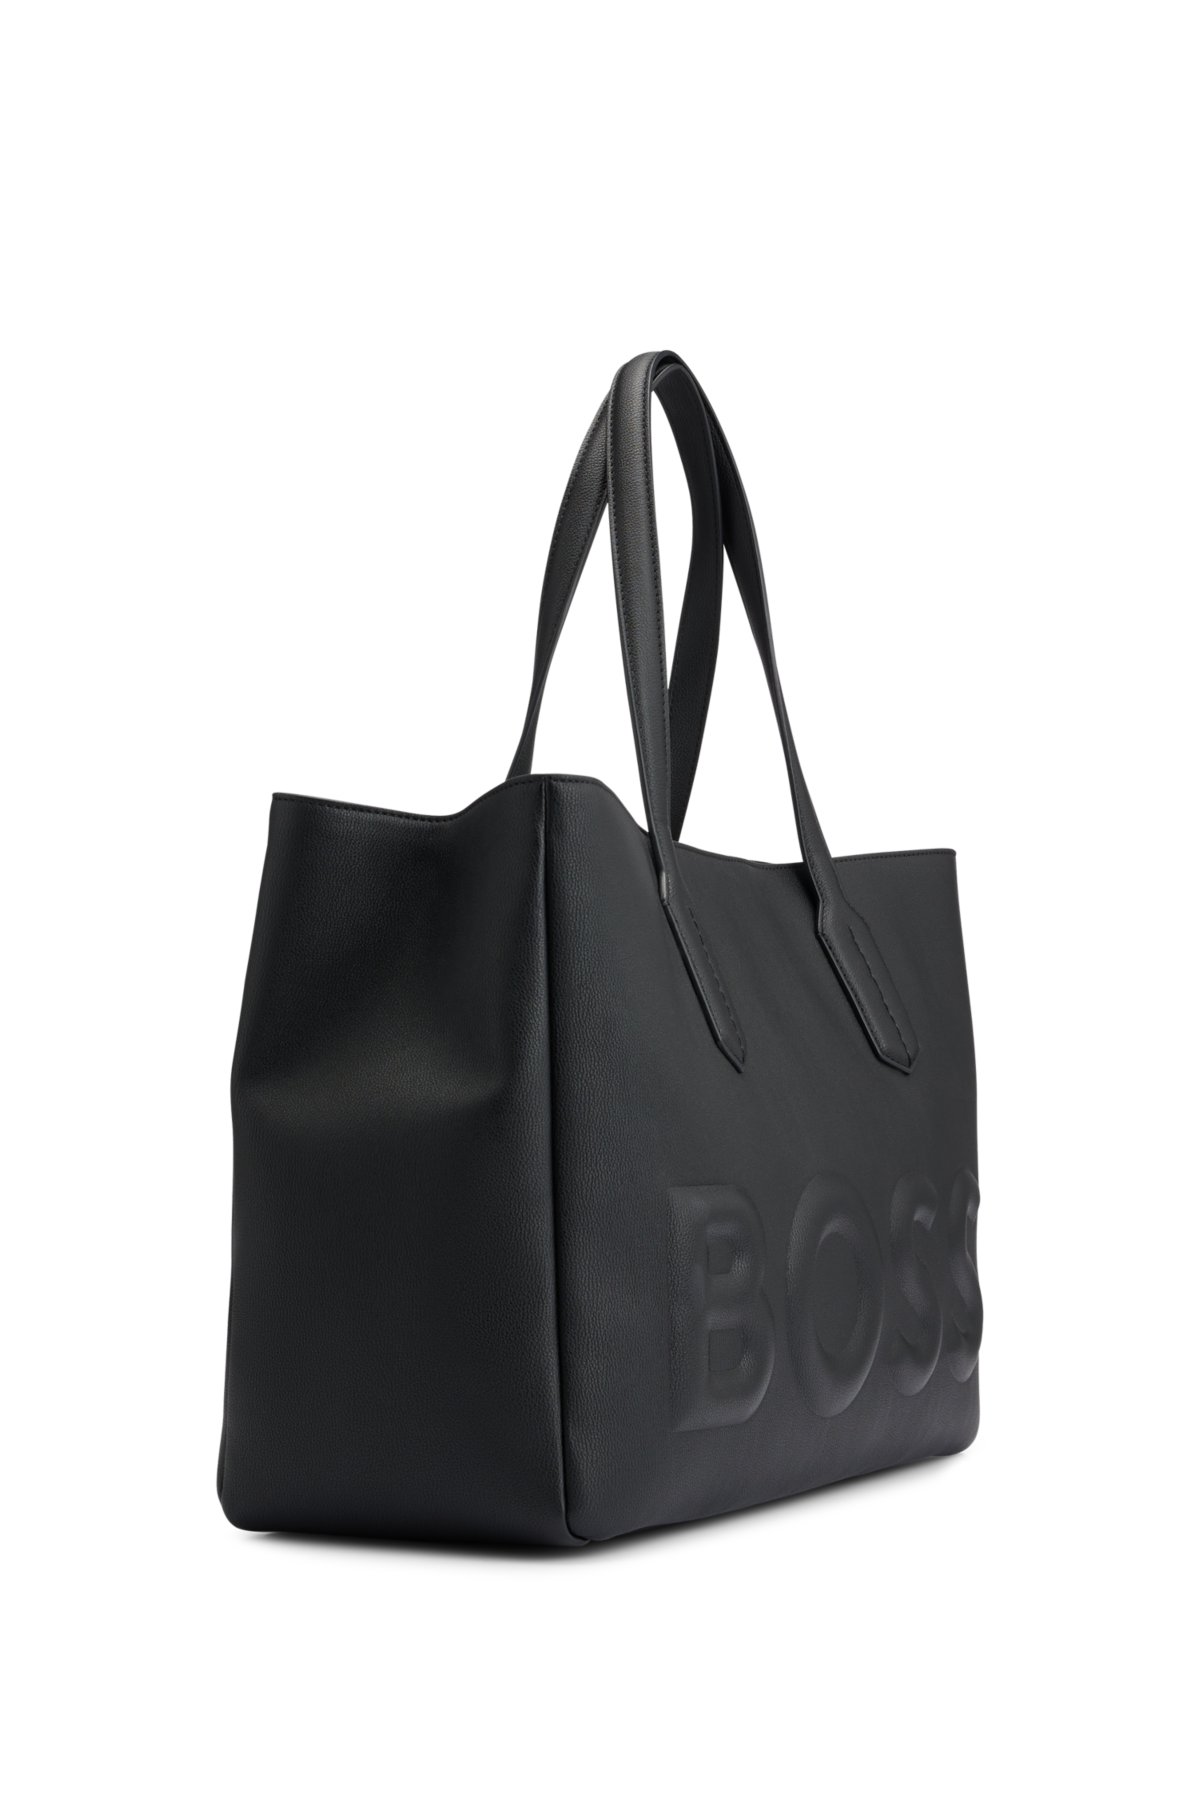 BOSS bag faux Tote leather with logo debossed in -